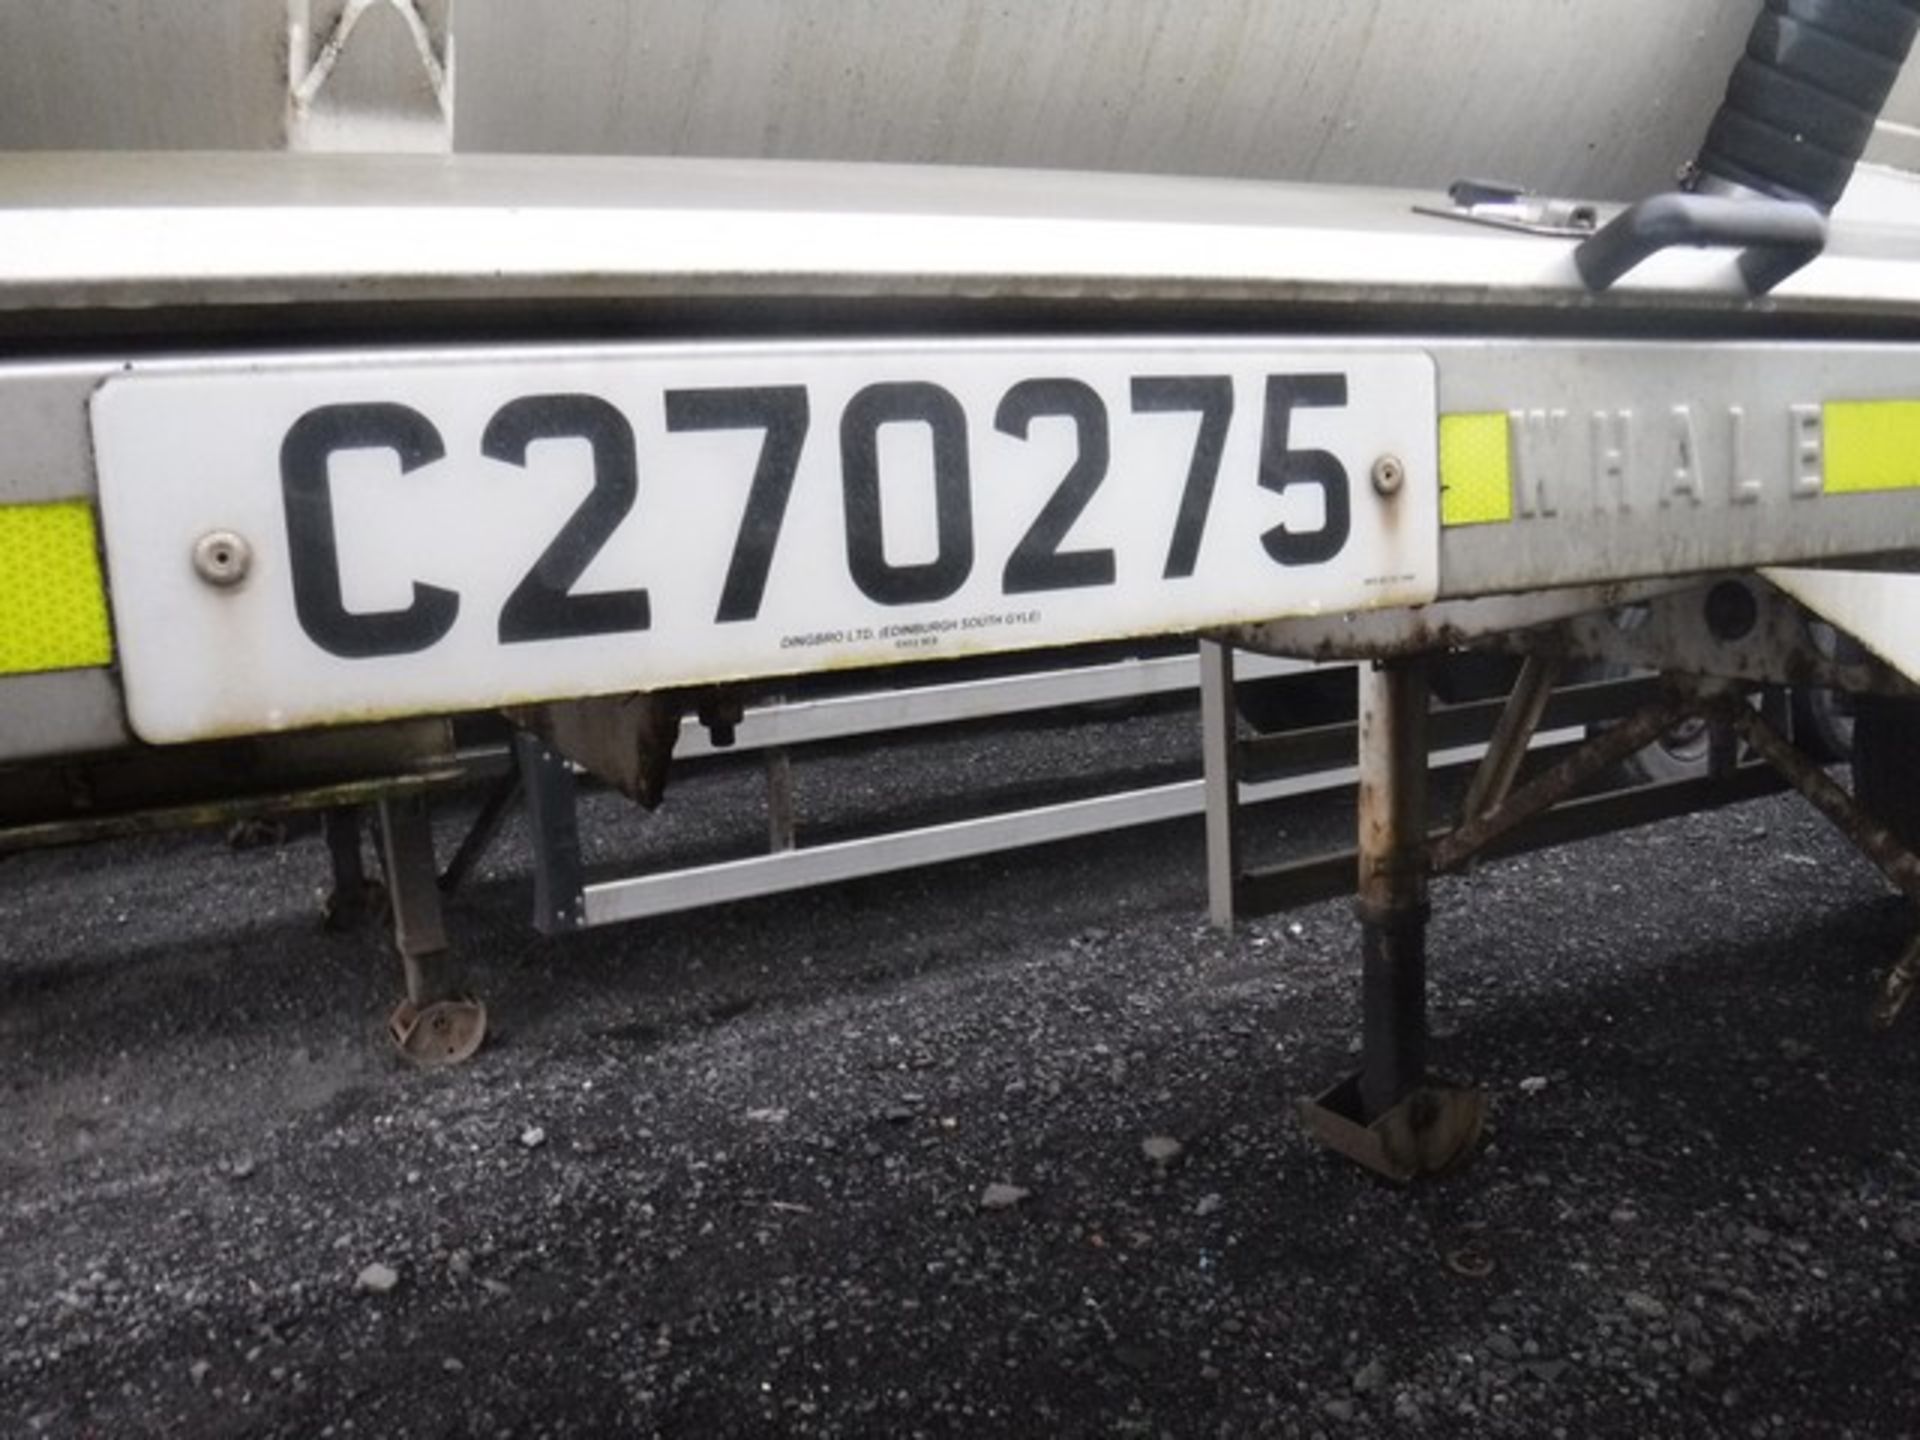 TANKER TRAILER 18000 LTR MAN 2008 Twin Axle - WHALE BOWSER ASSET NO. - C270275 - Image 4 of 8